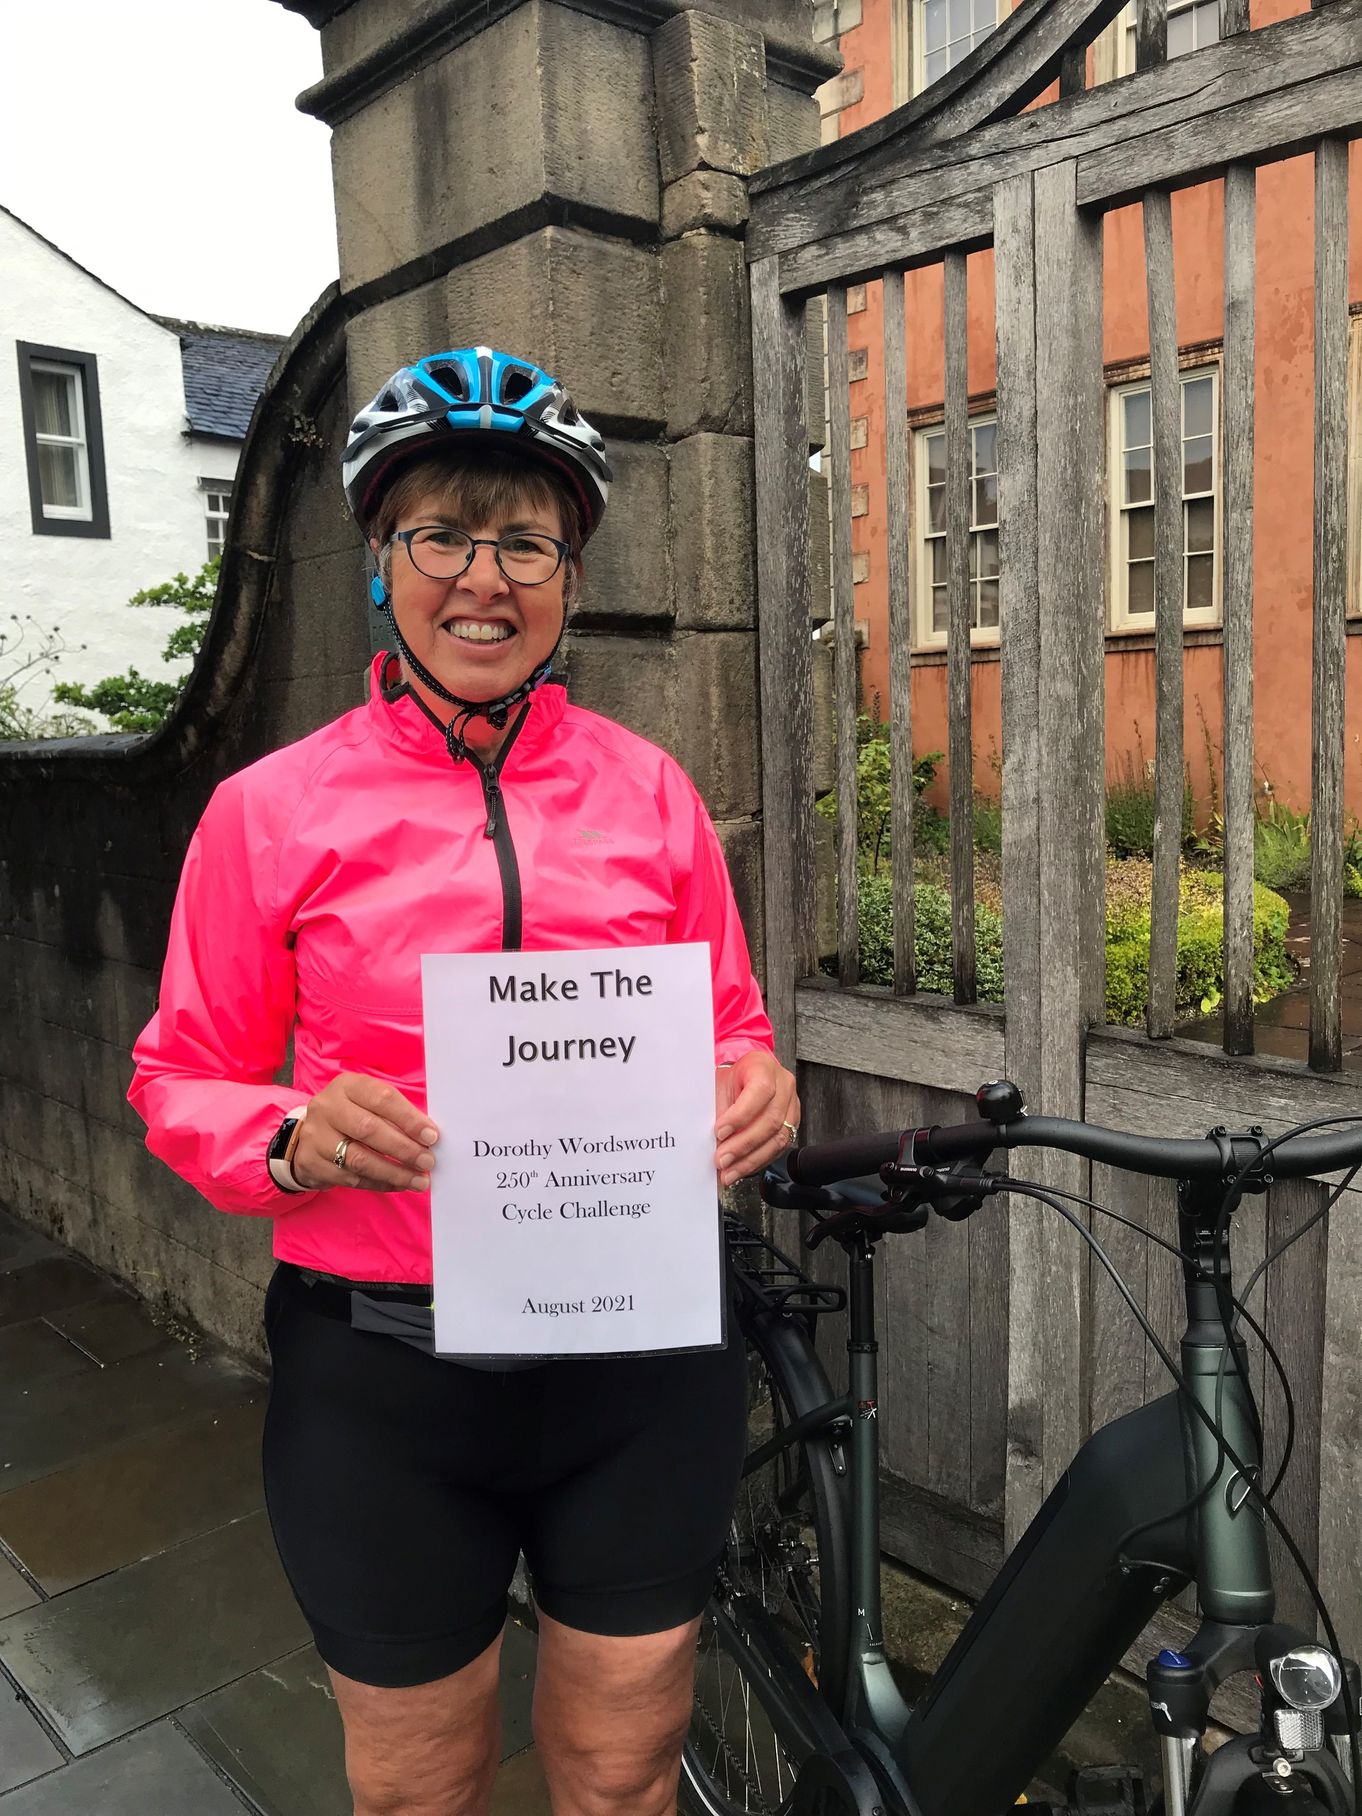 Gill Conlon starting her Make the Journey challenge for Dorothy Wordsworth's 250th anniversary outside Wordsworth House and Garden, Cockermouth